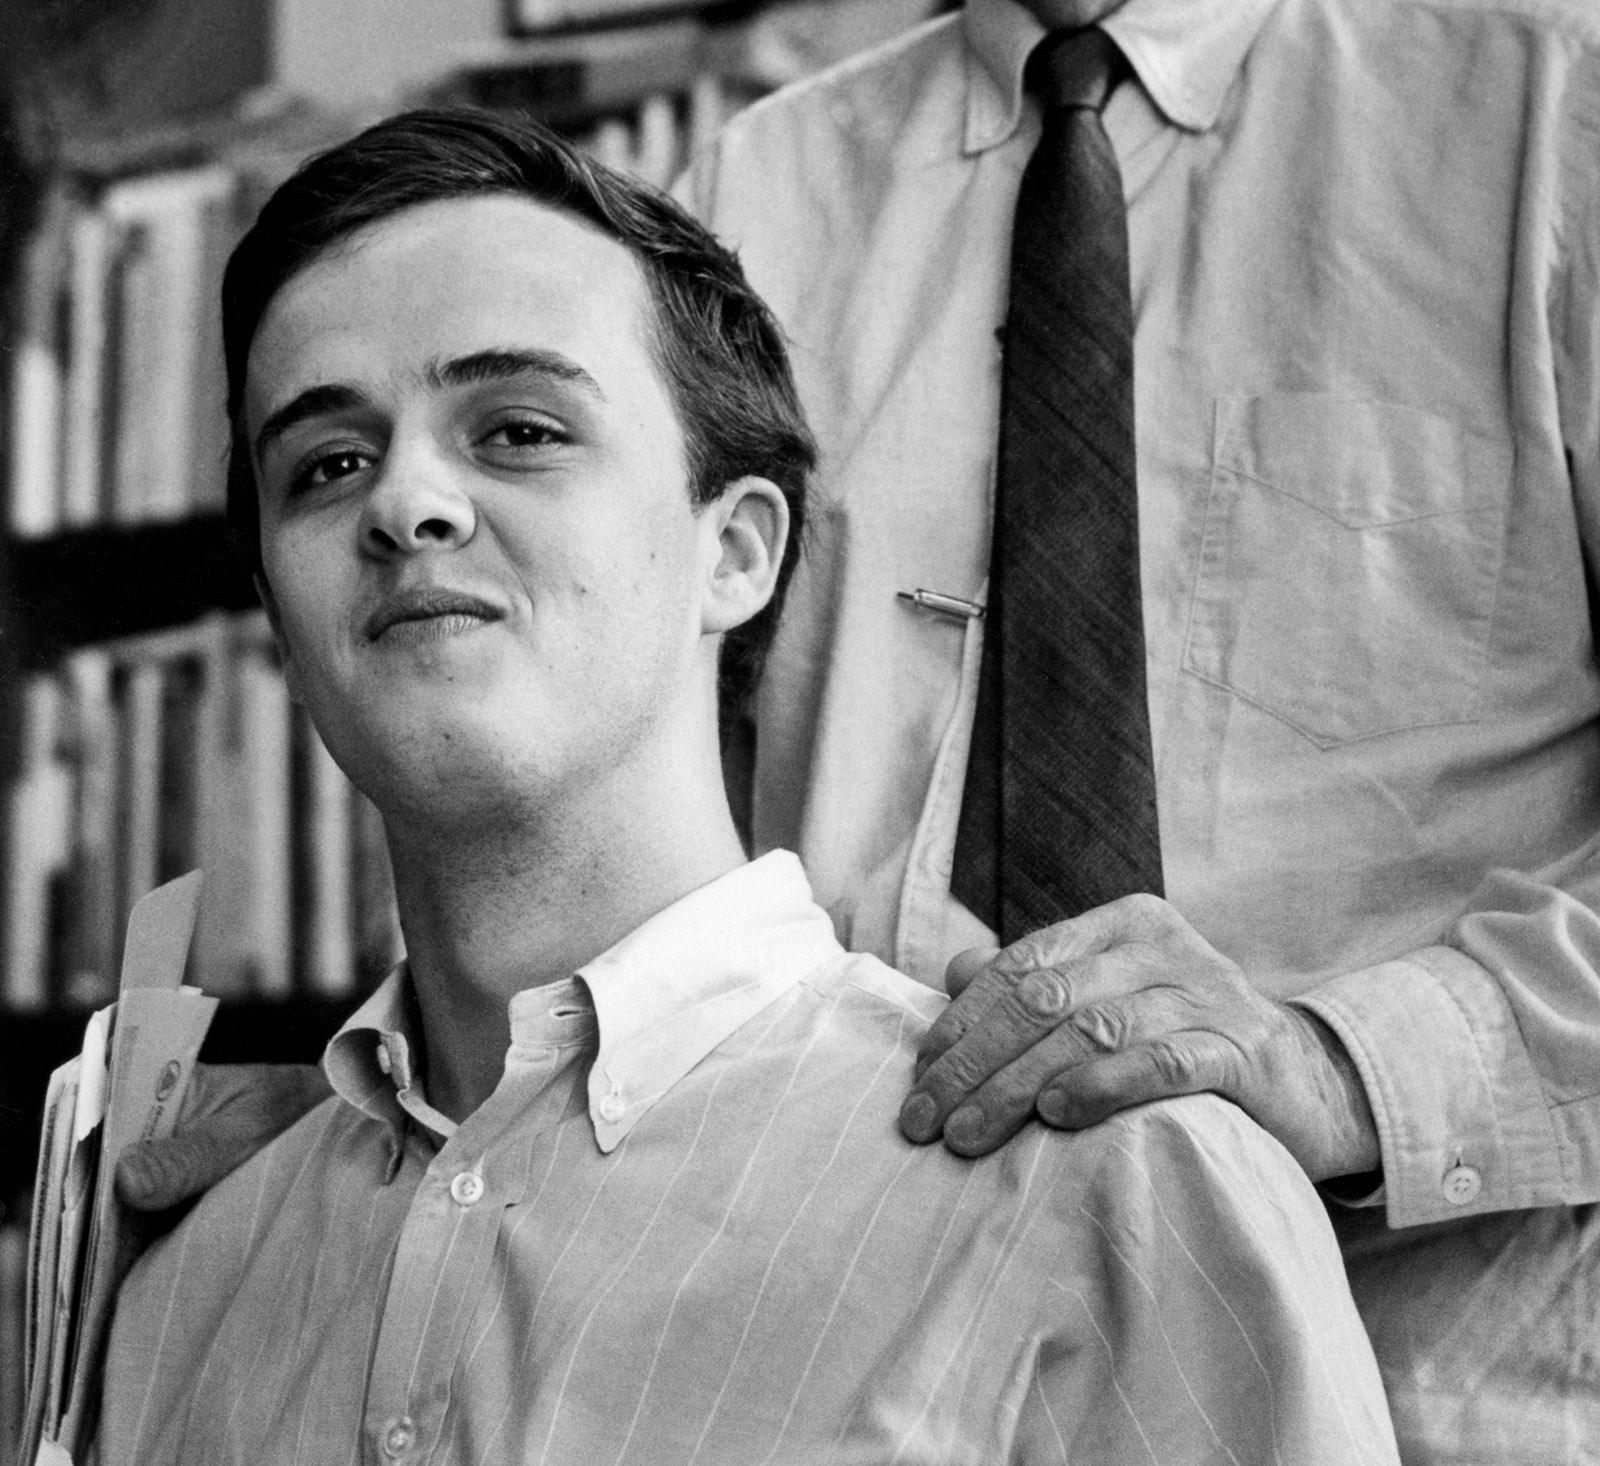 James Tate at the Grolier Poetry Book Shop, Cambridge, Massachusetts, 1965